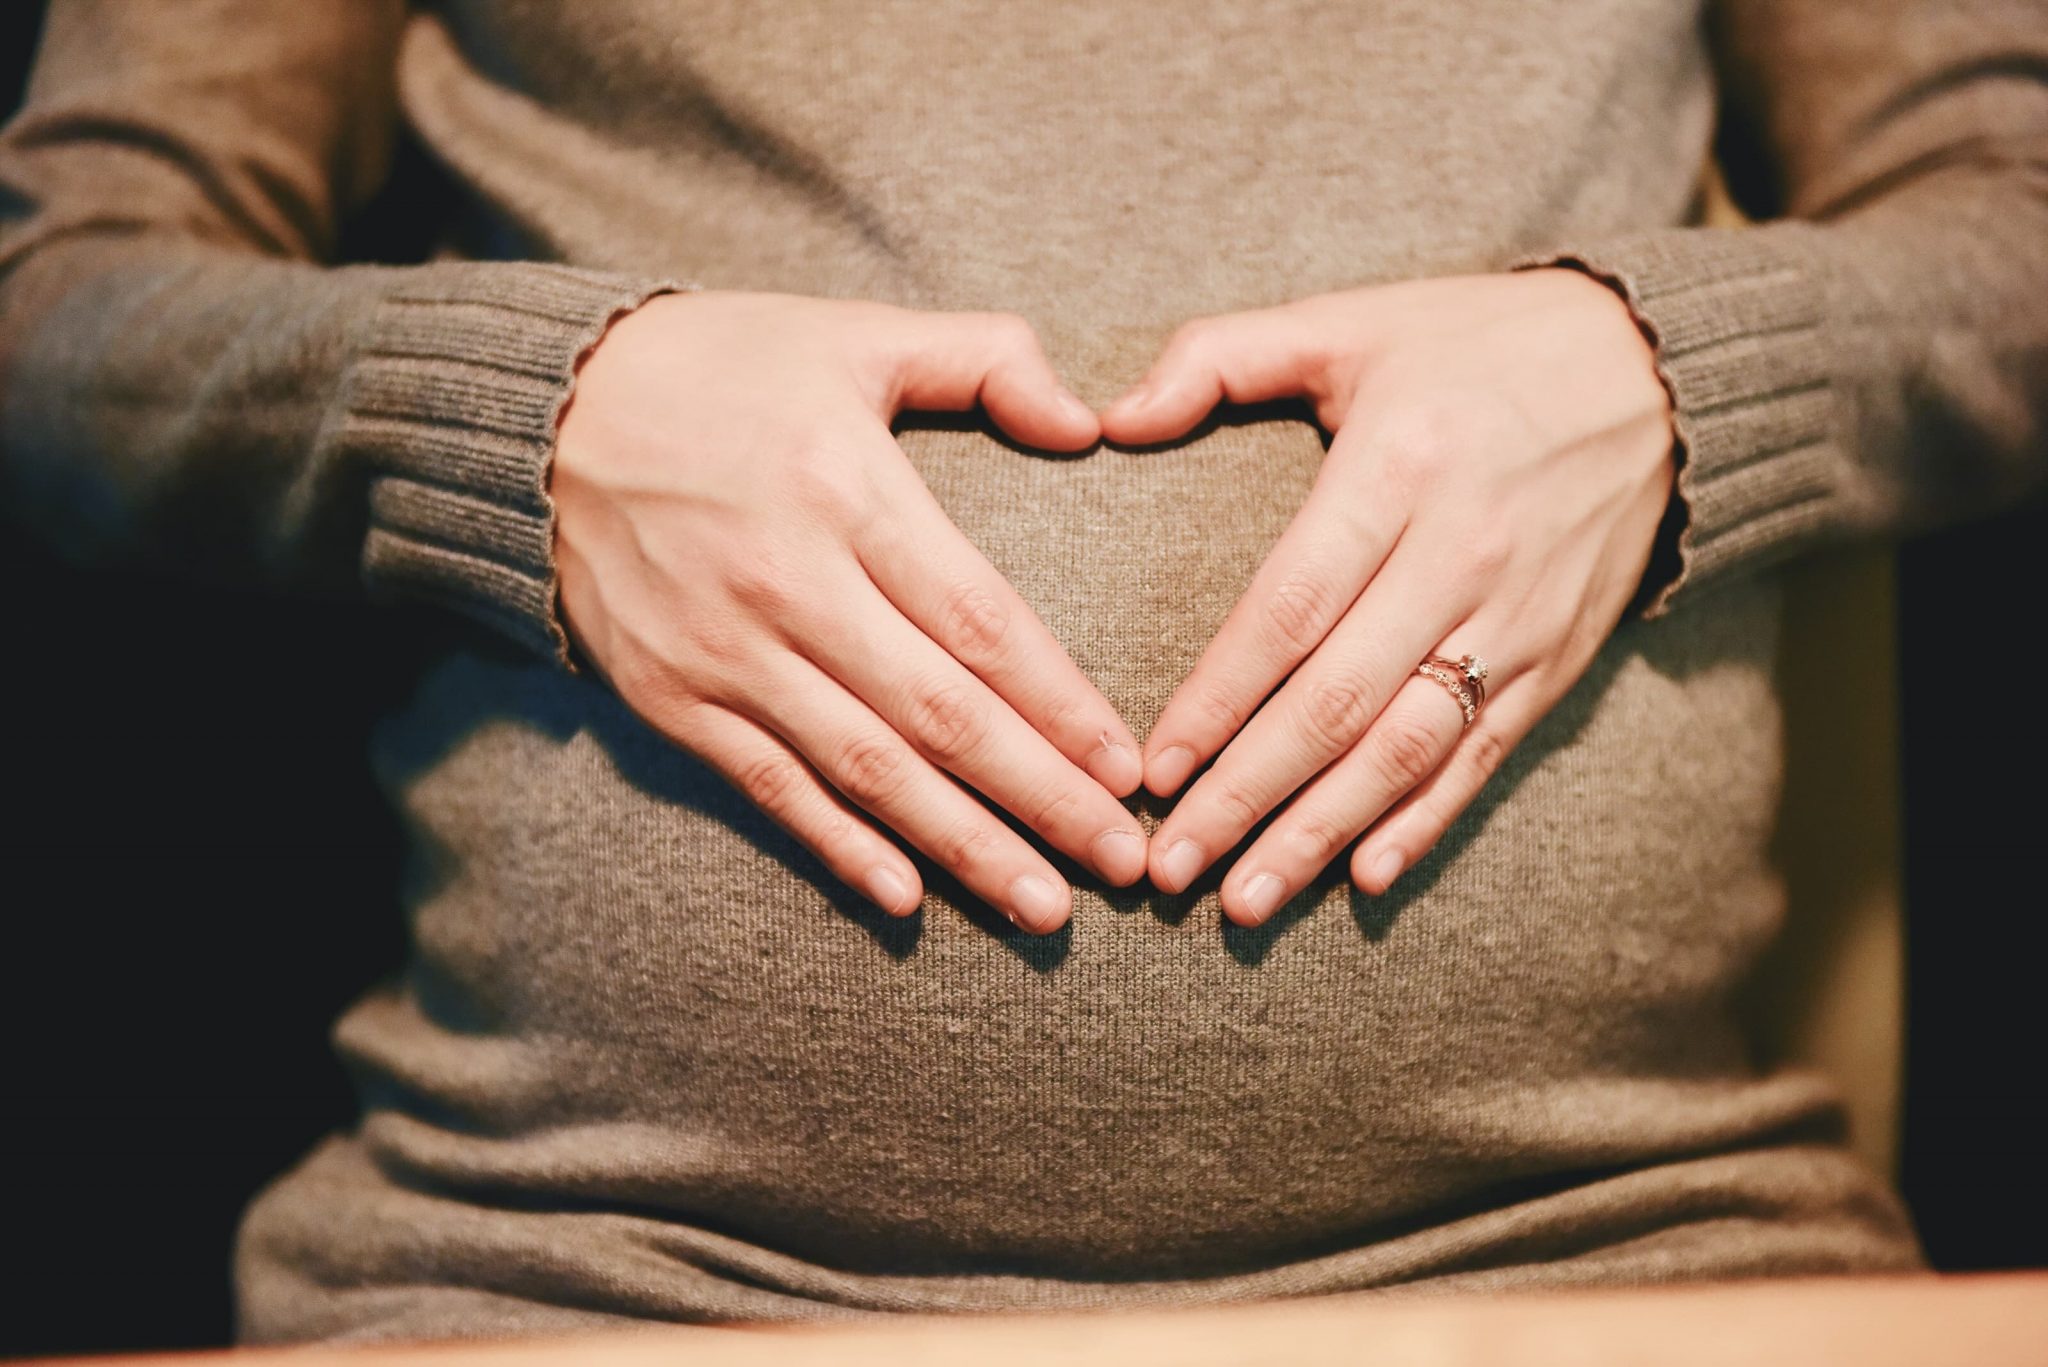 6 Surprising Benefits of Pregnancy You Need to Know About